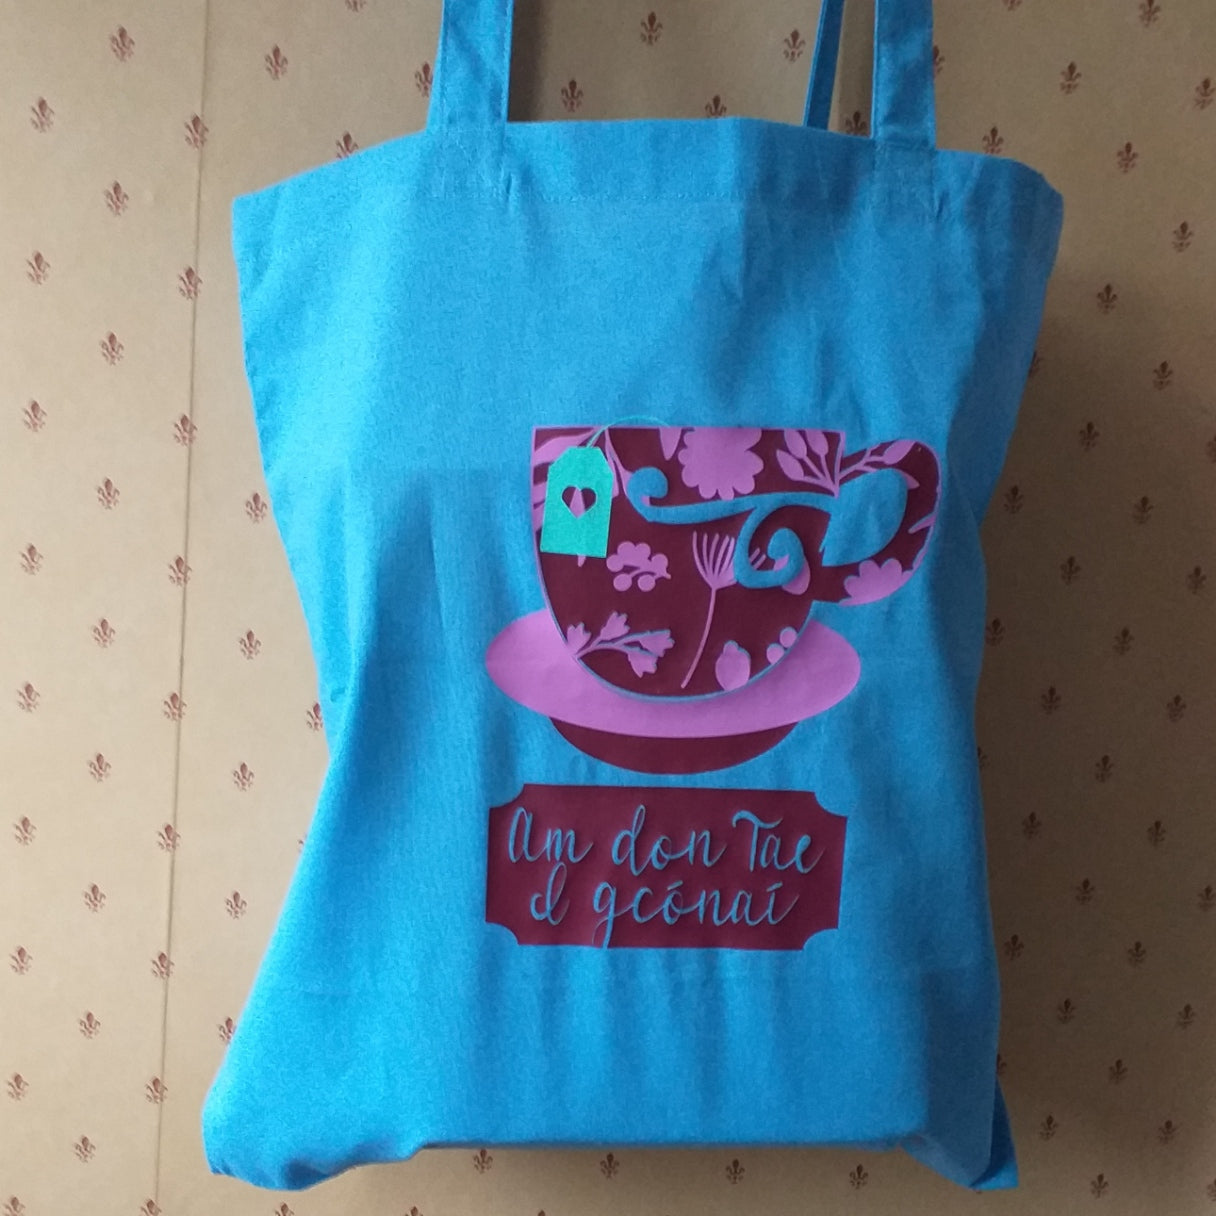 Tote bag for tea drinkers!